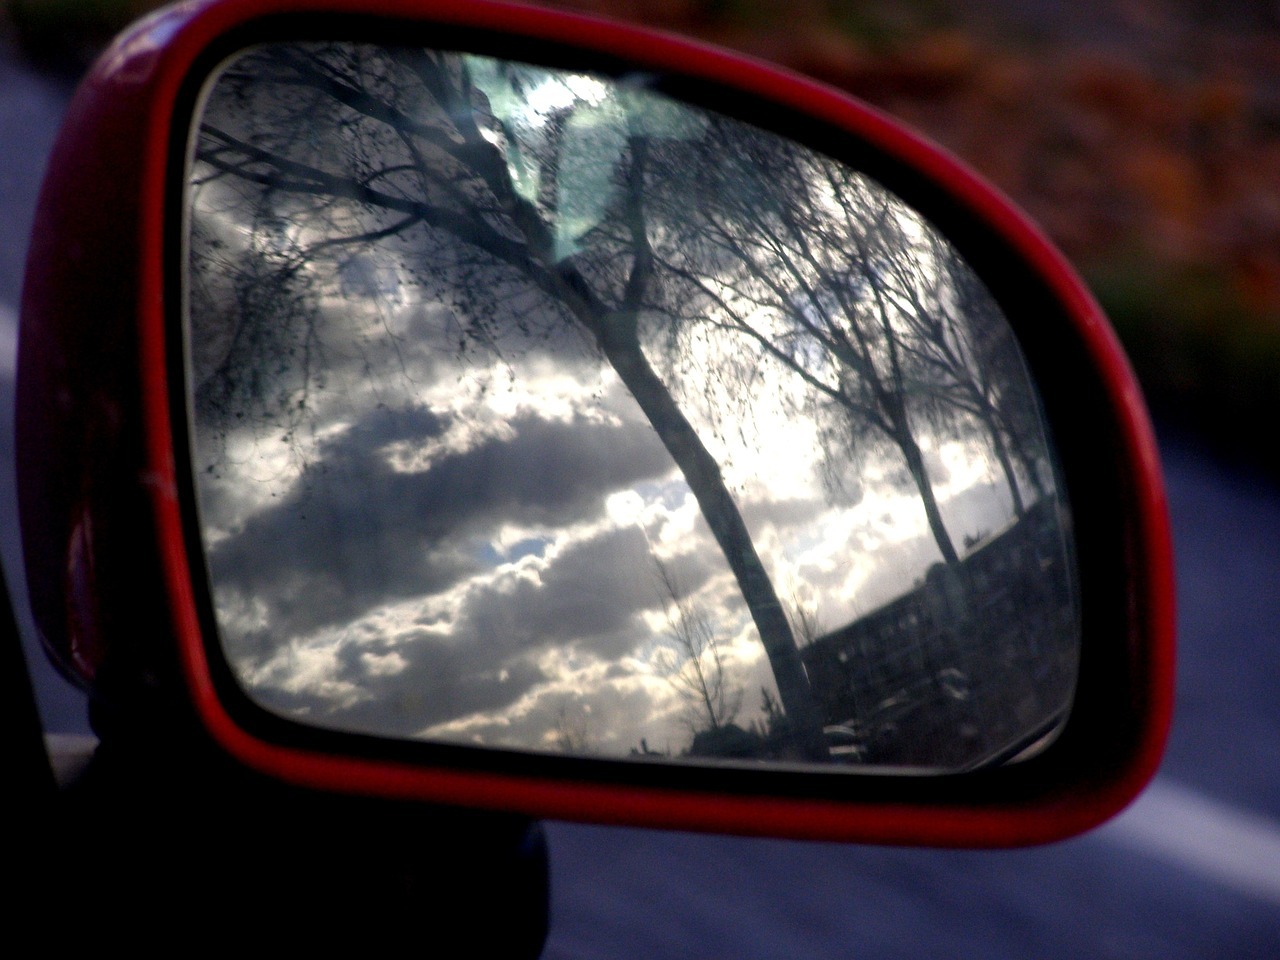 A side mirror with reflection